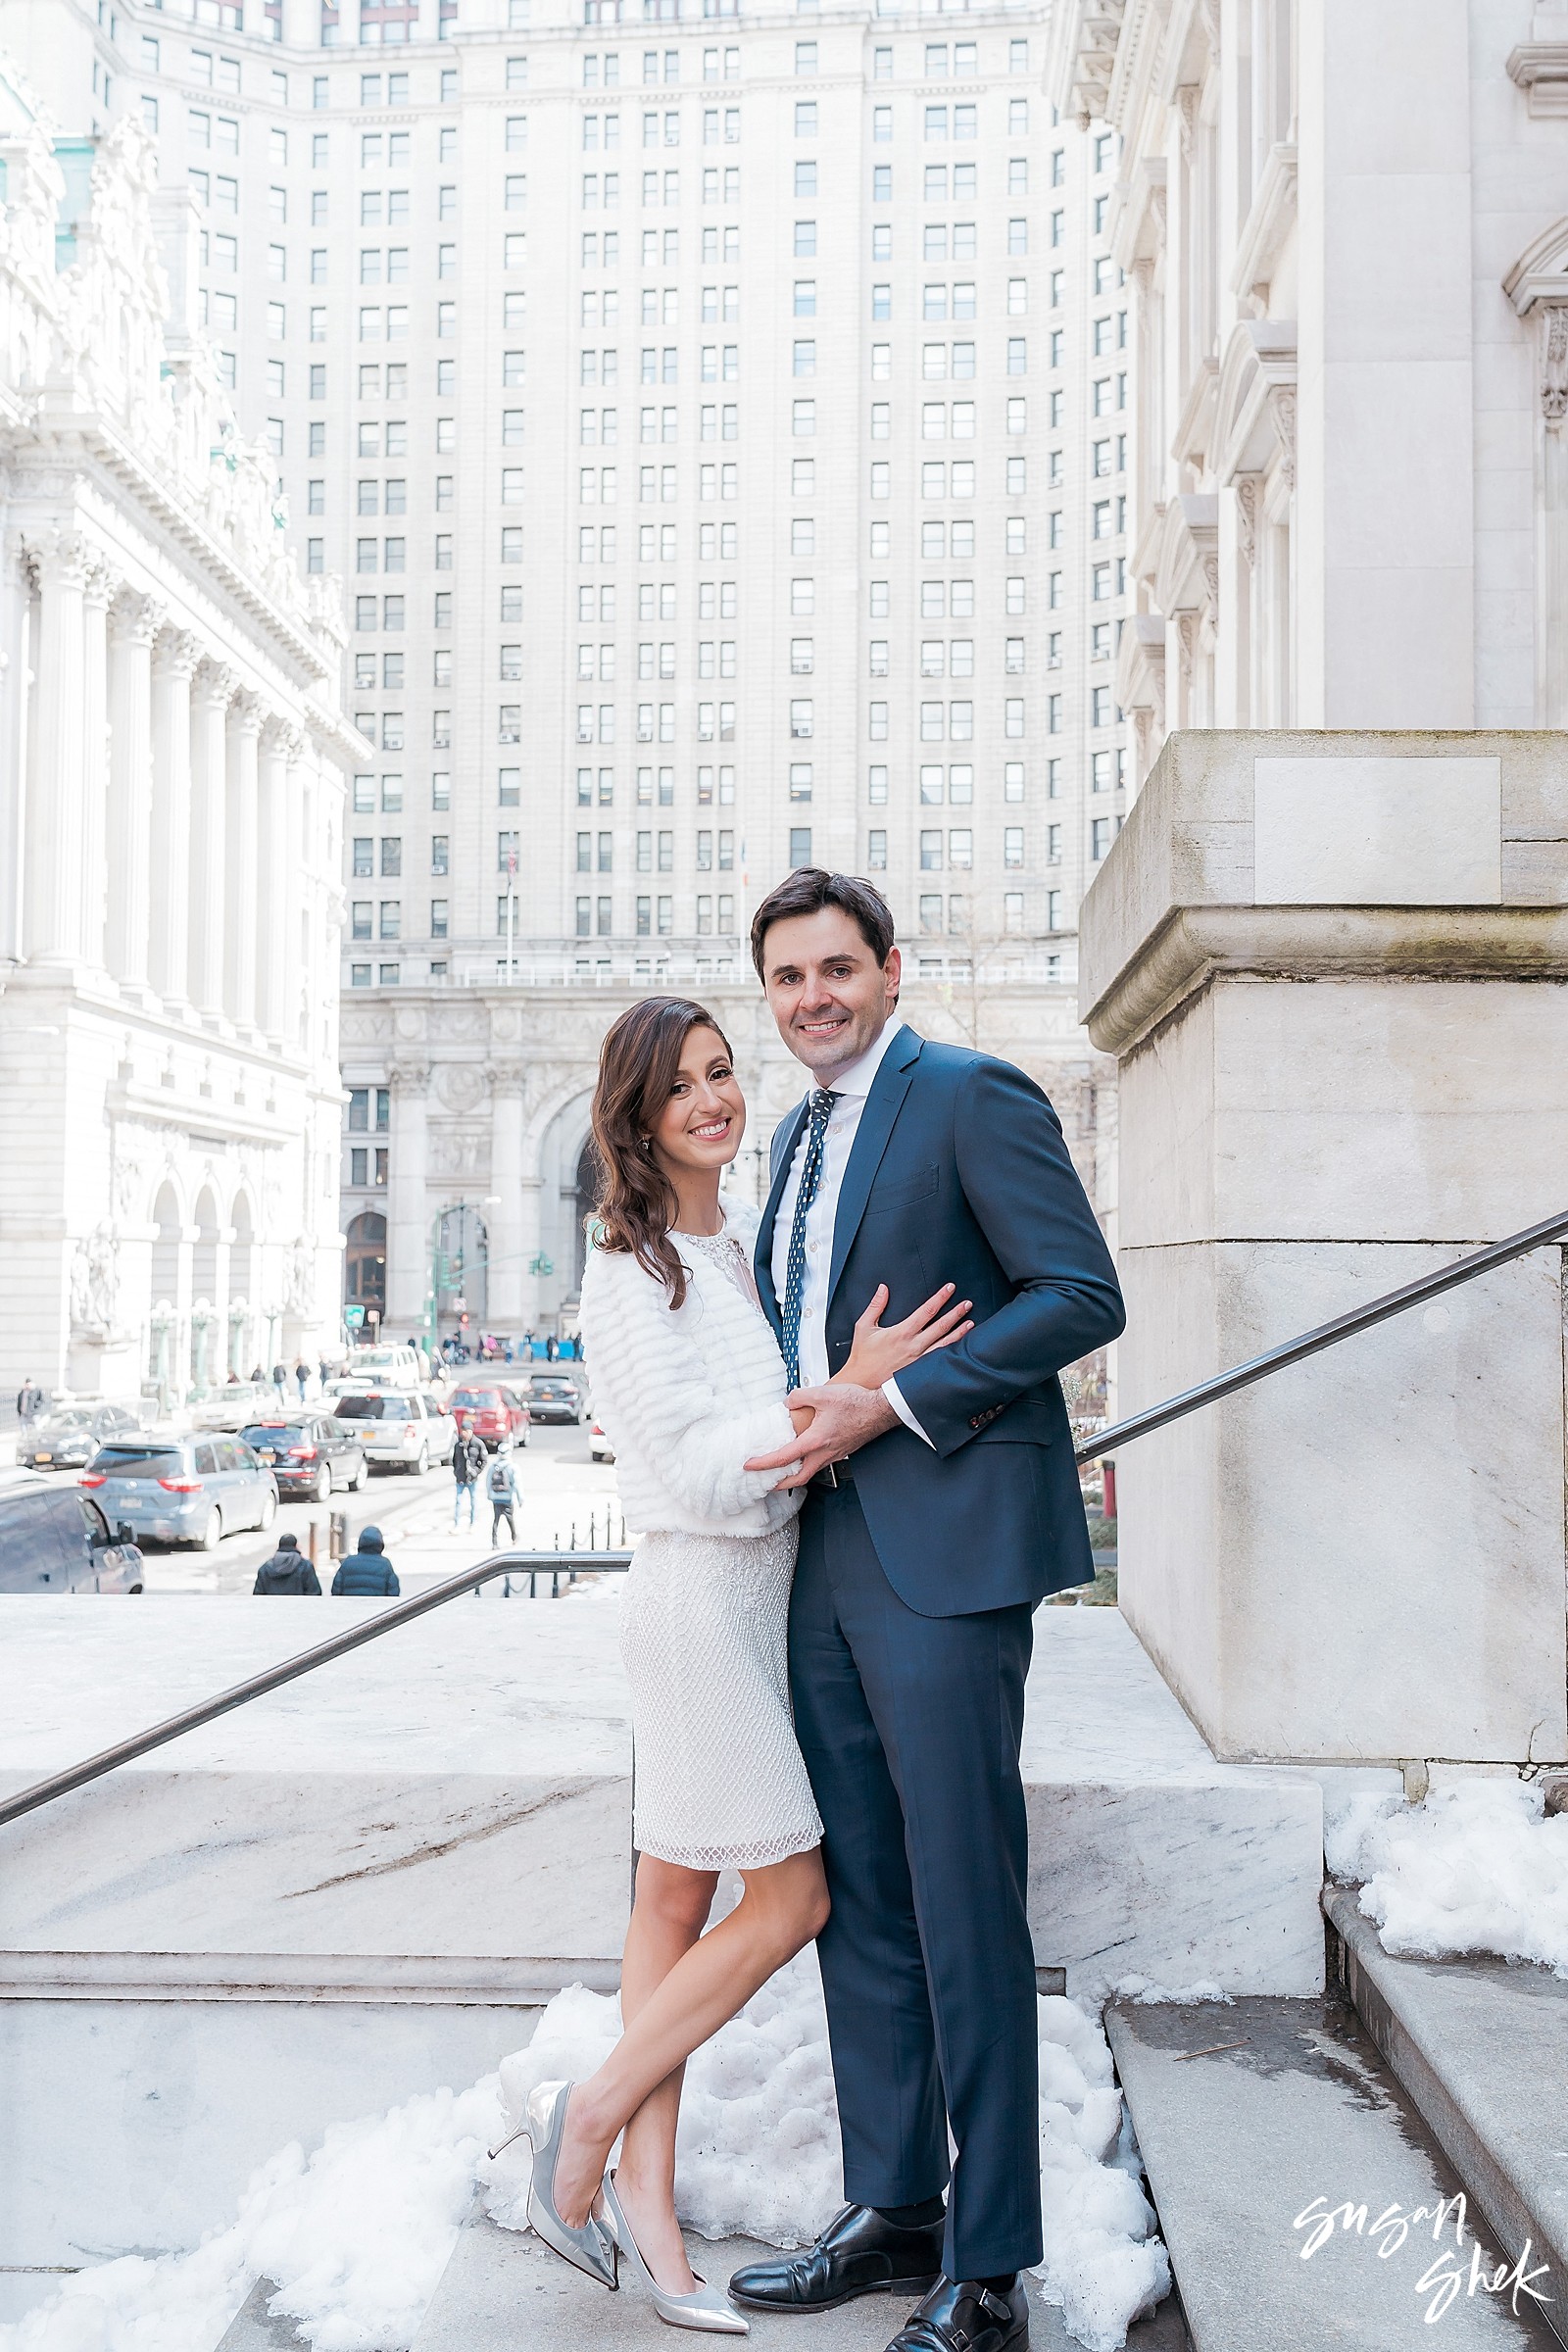 city hall wedding photographer, city hall weddings, courthouse wedding, city hall wedding photography, wedding photography, nyc wedding photographer, elopement, eloping in new york, eloping at city hall